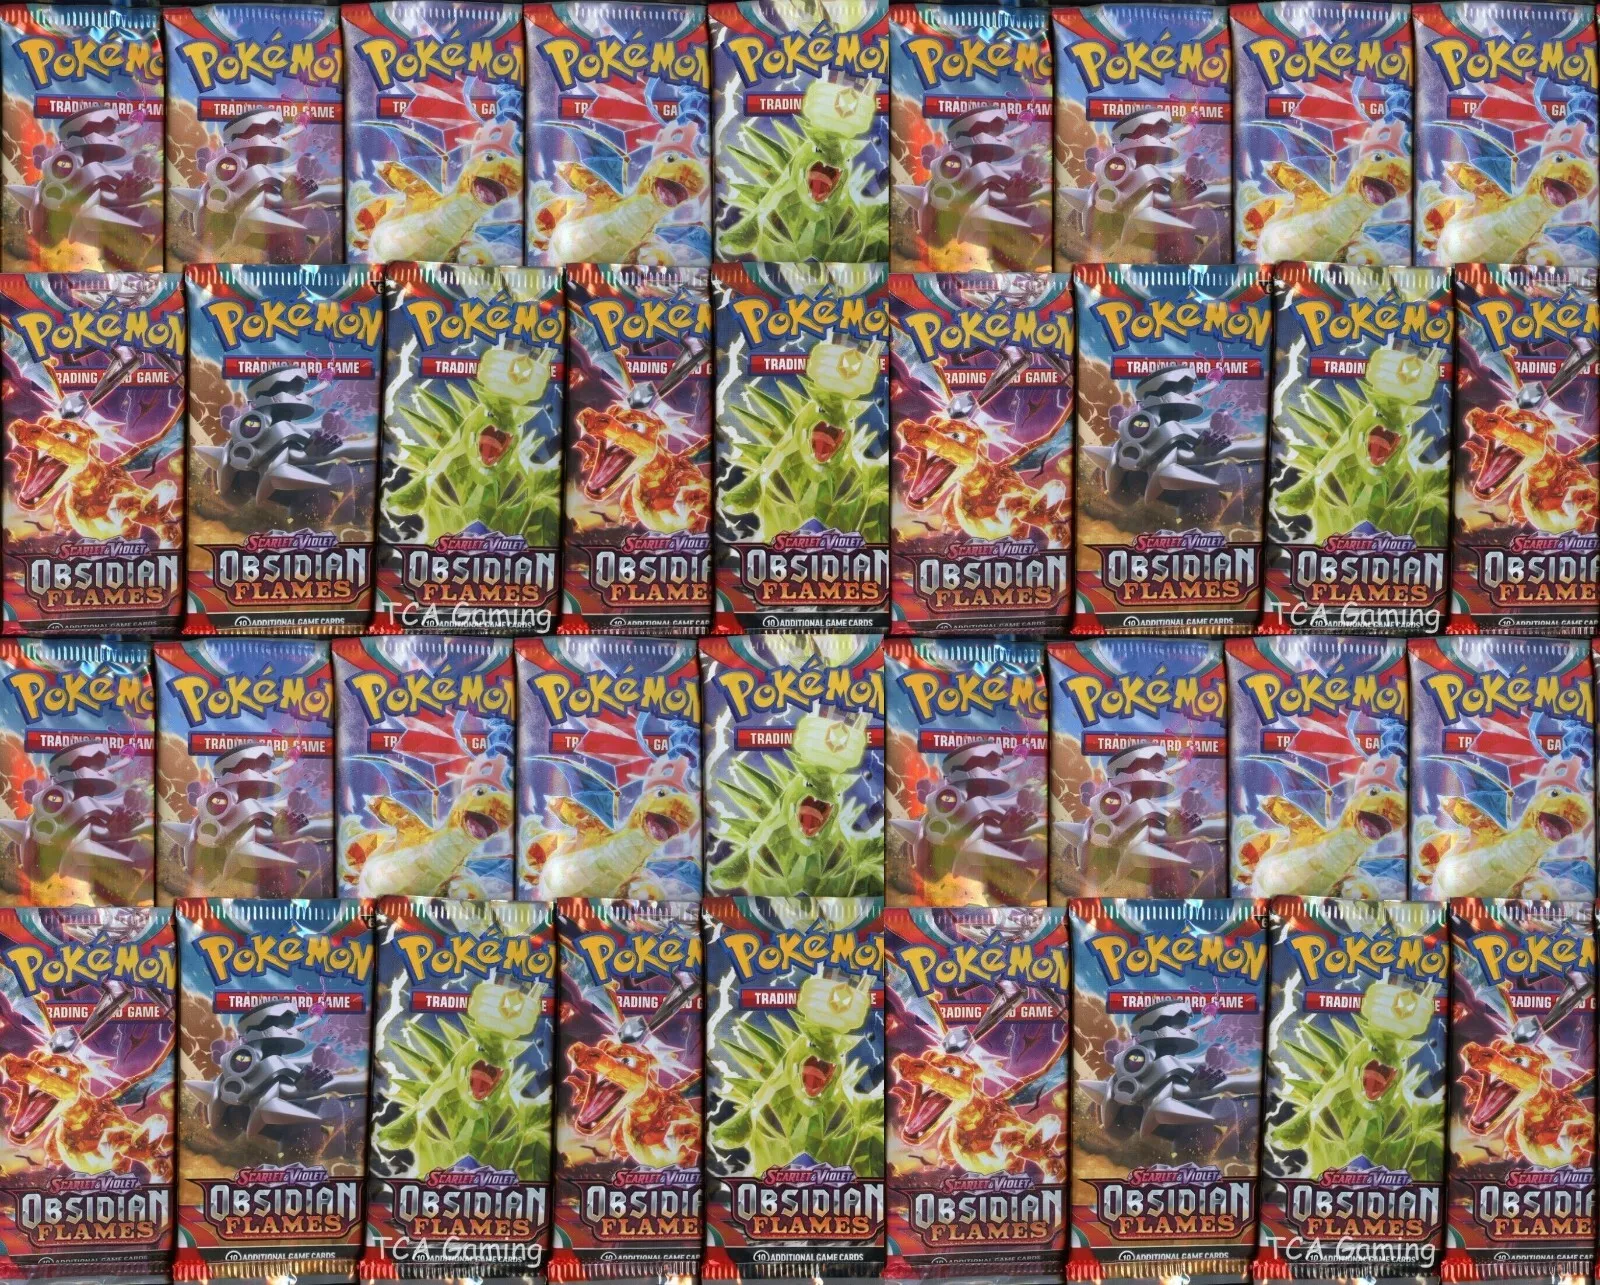 Pokemon Obsidian Flames Lot of 36 Loose Booster Packs